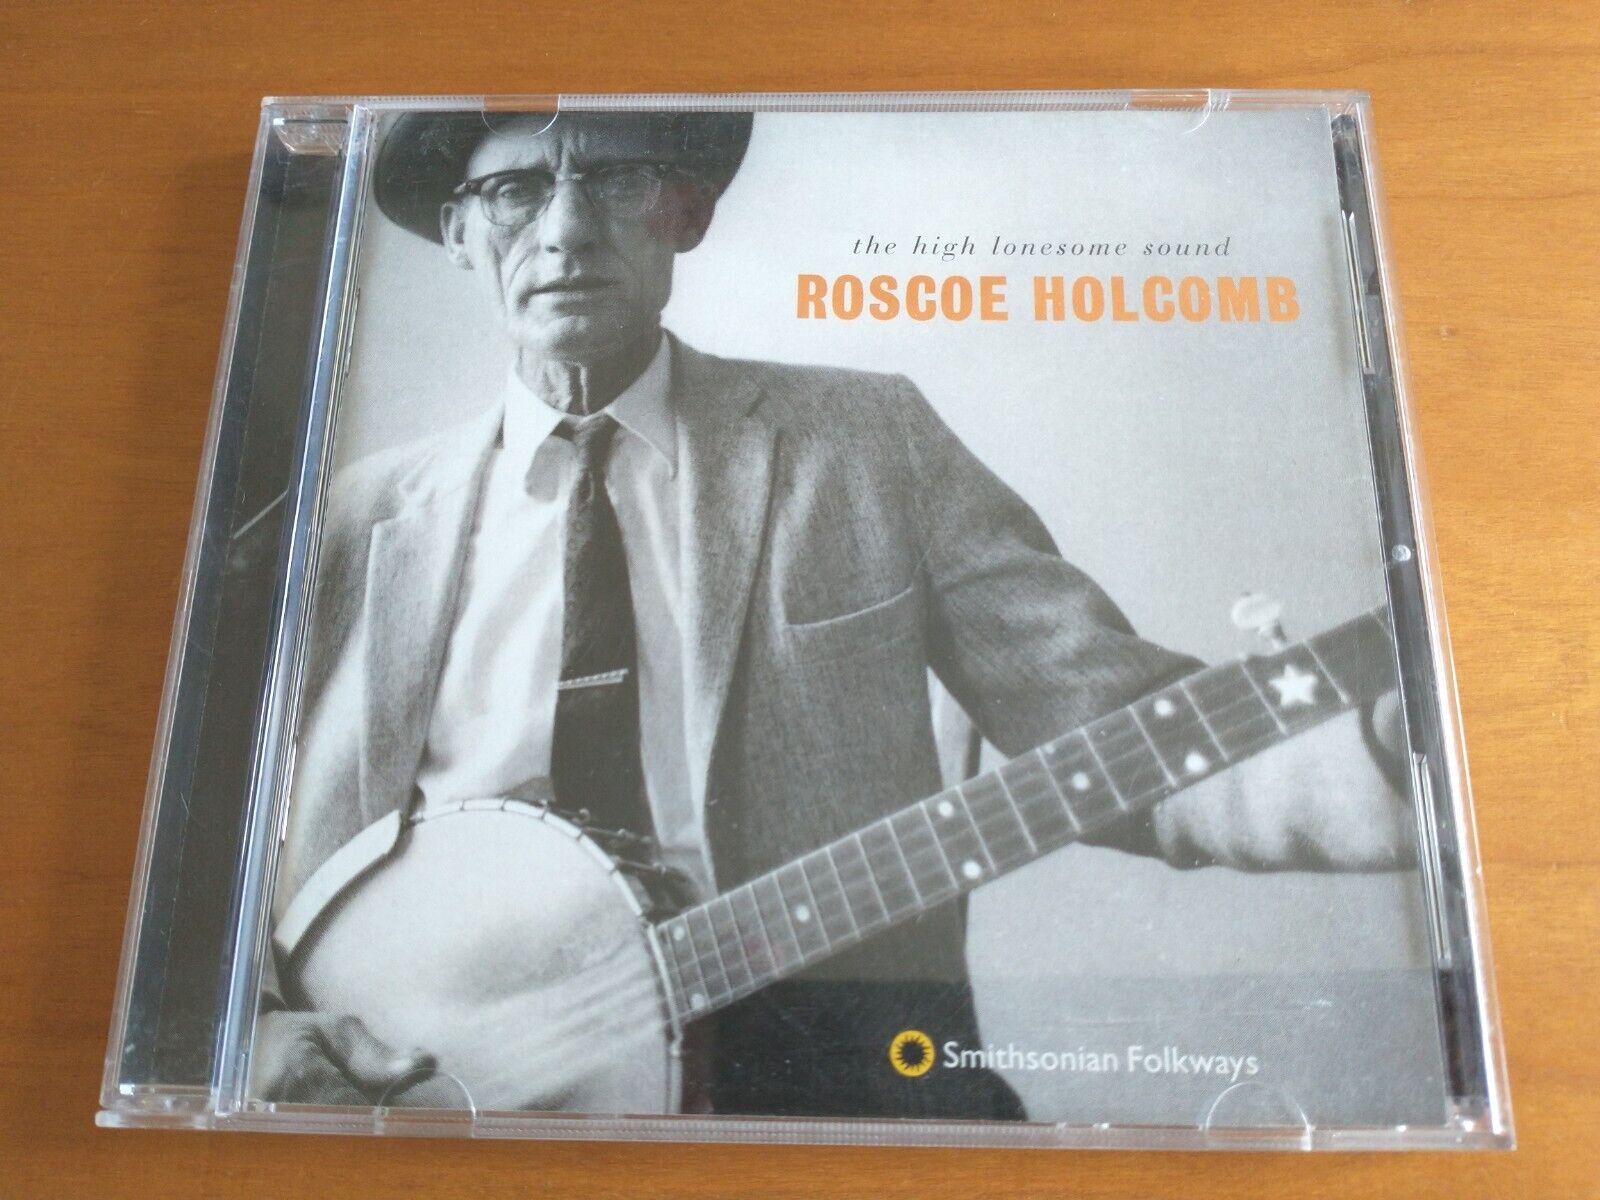 Roscoe Holcomb - The High Lonesome Sound CD (1998, Smithsonian Folkways) 